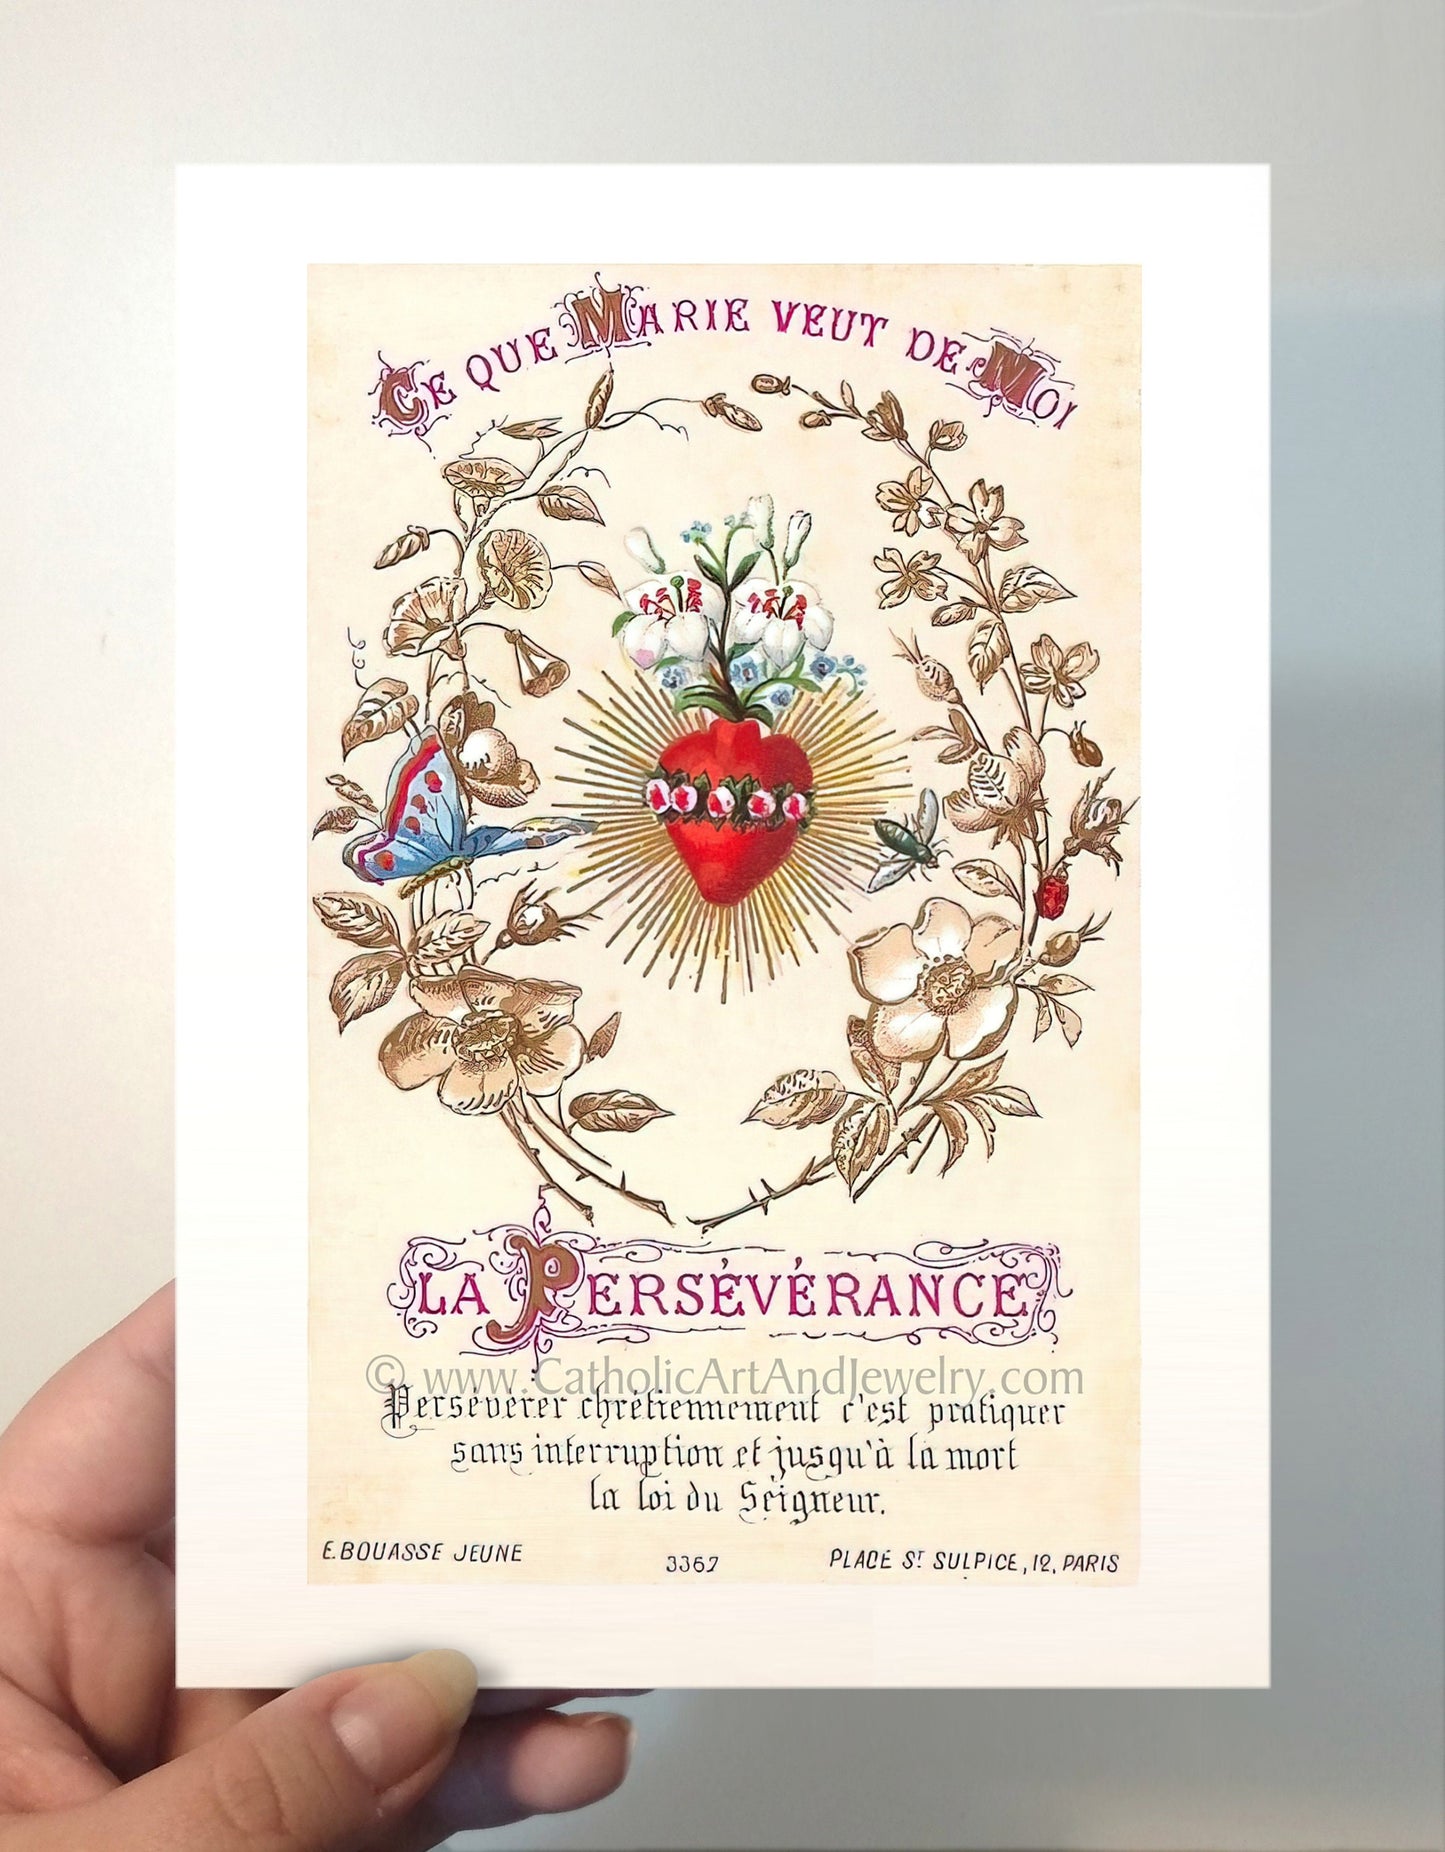 Perseverance – Based on a Vintage French Holy Card – Catholic Art